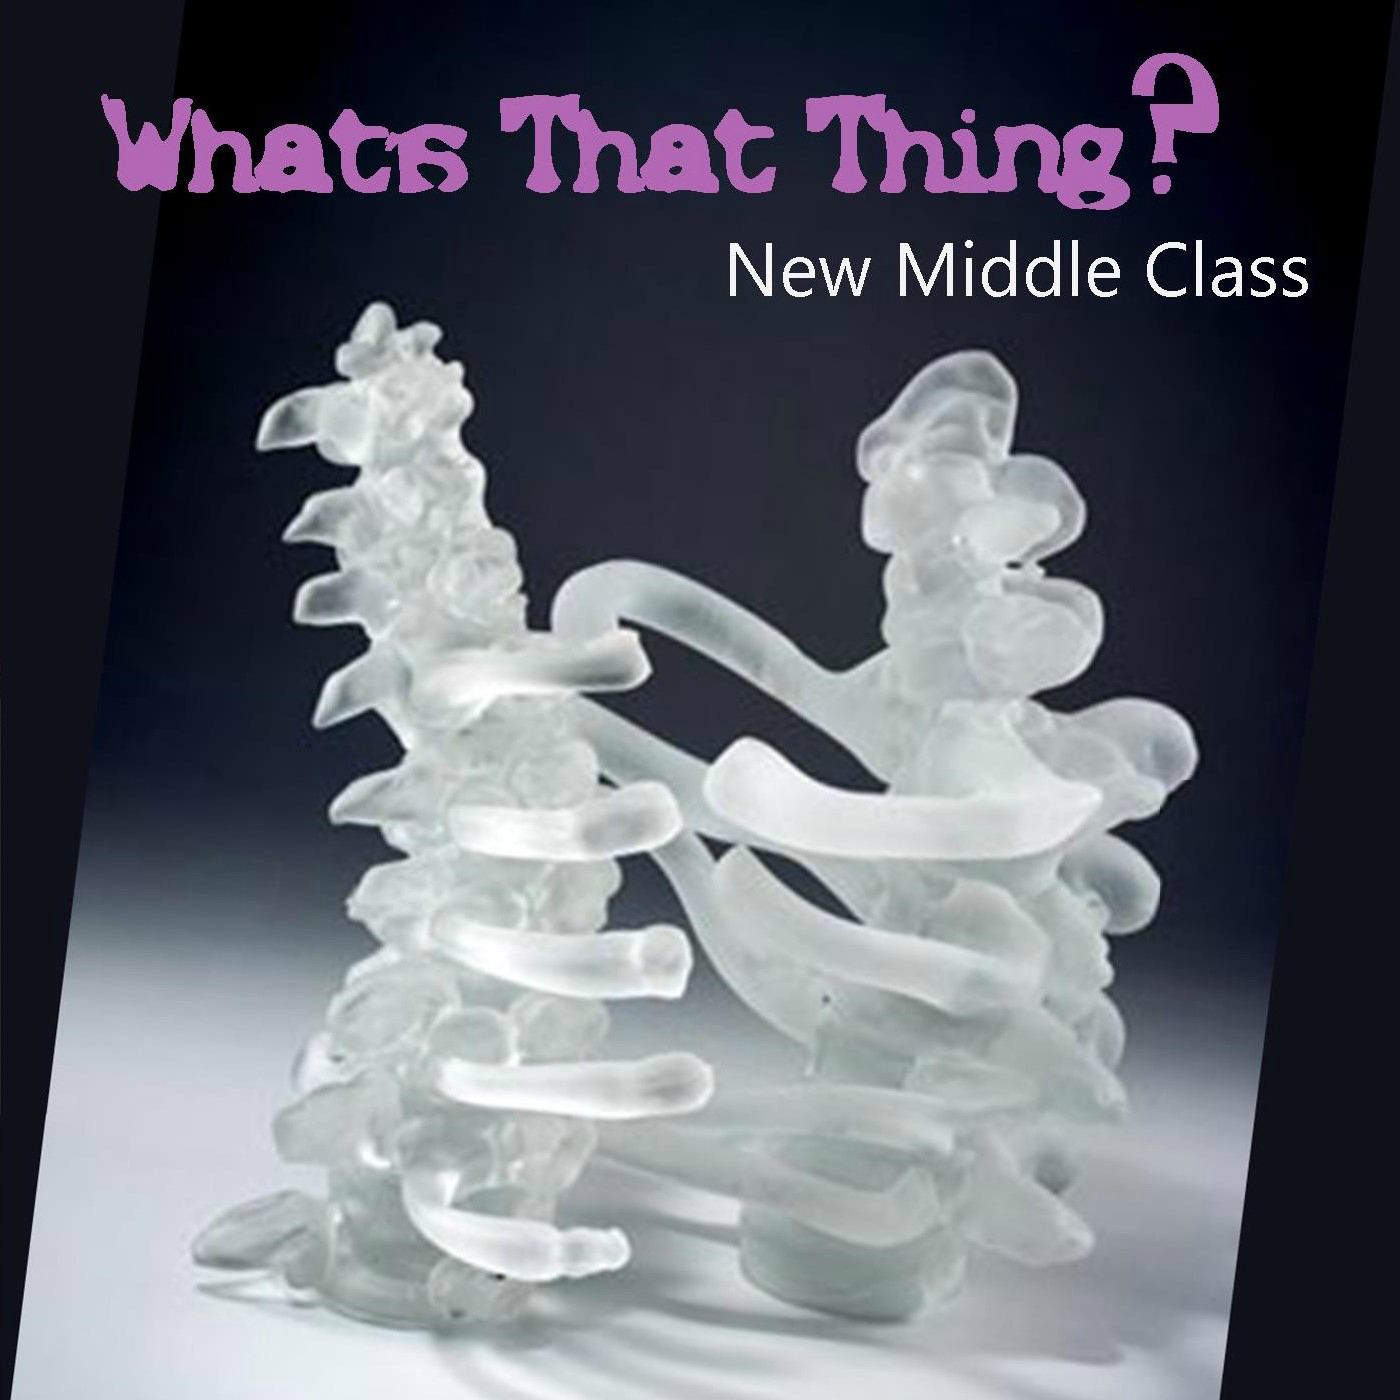 Art for What's That Thing? by New Middle Class